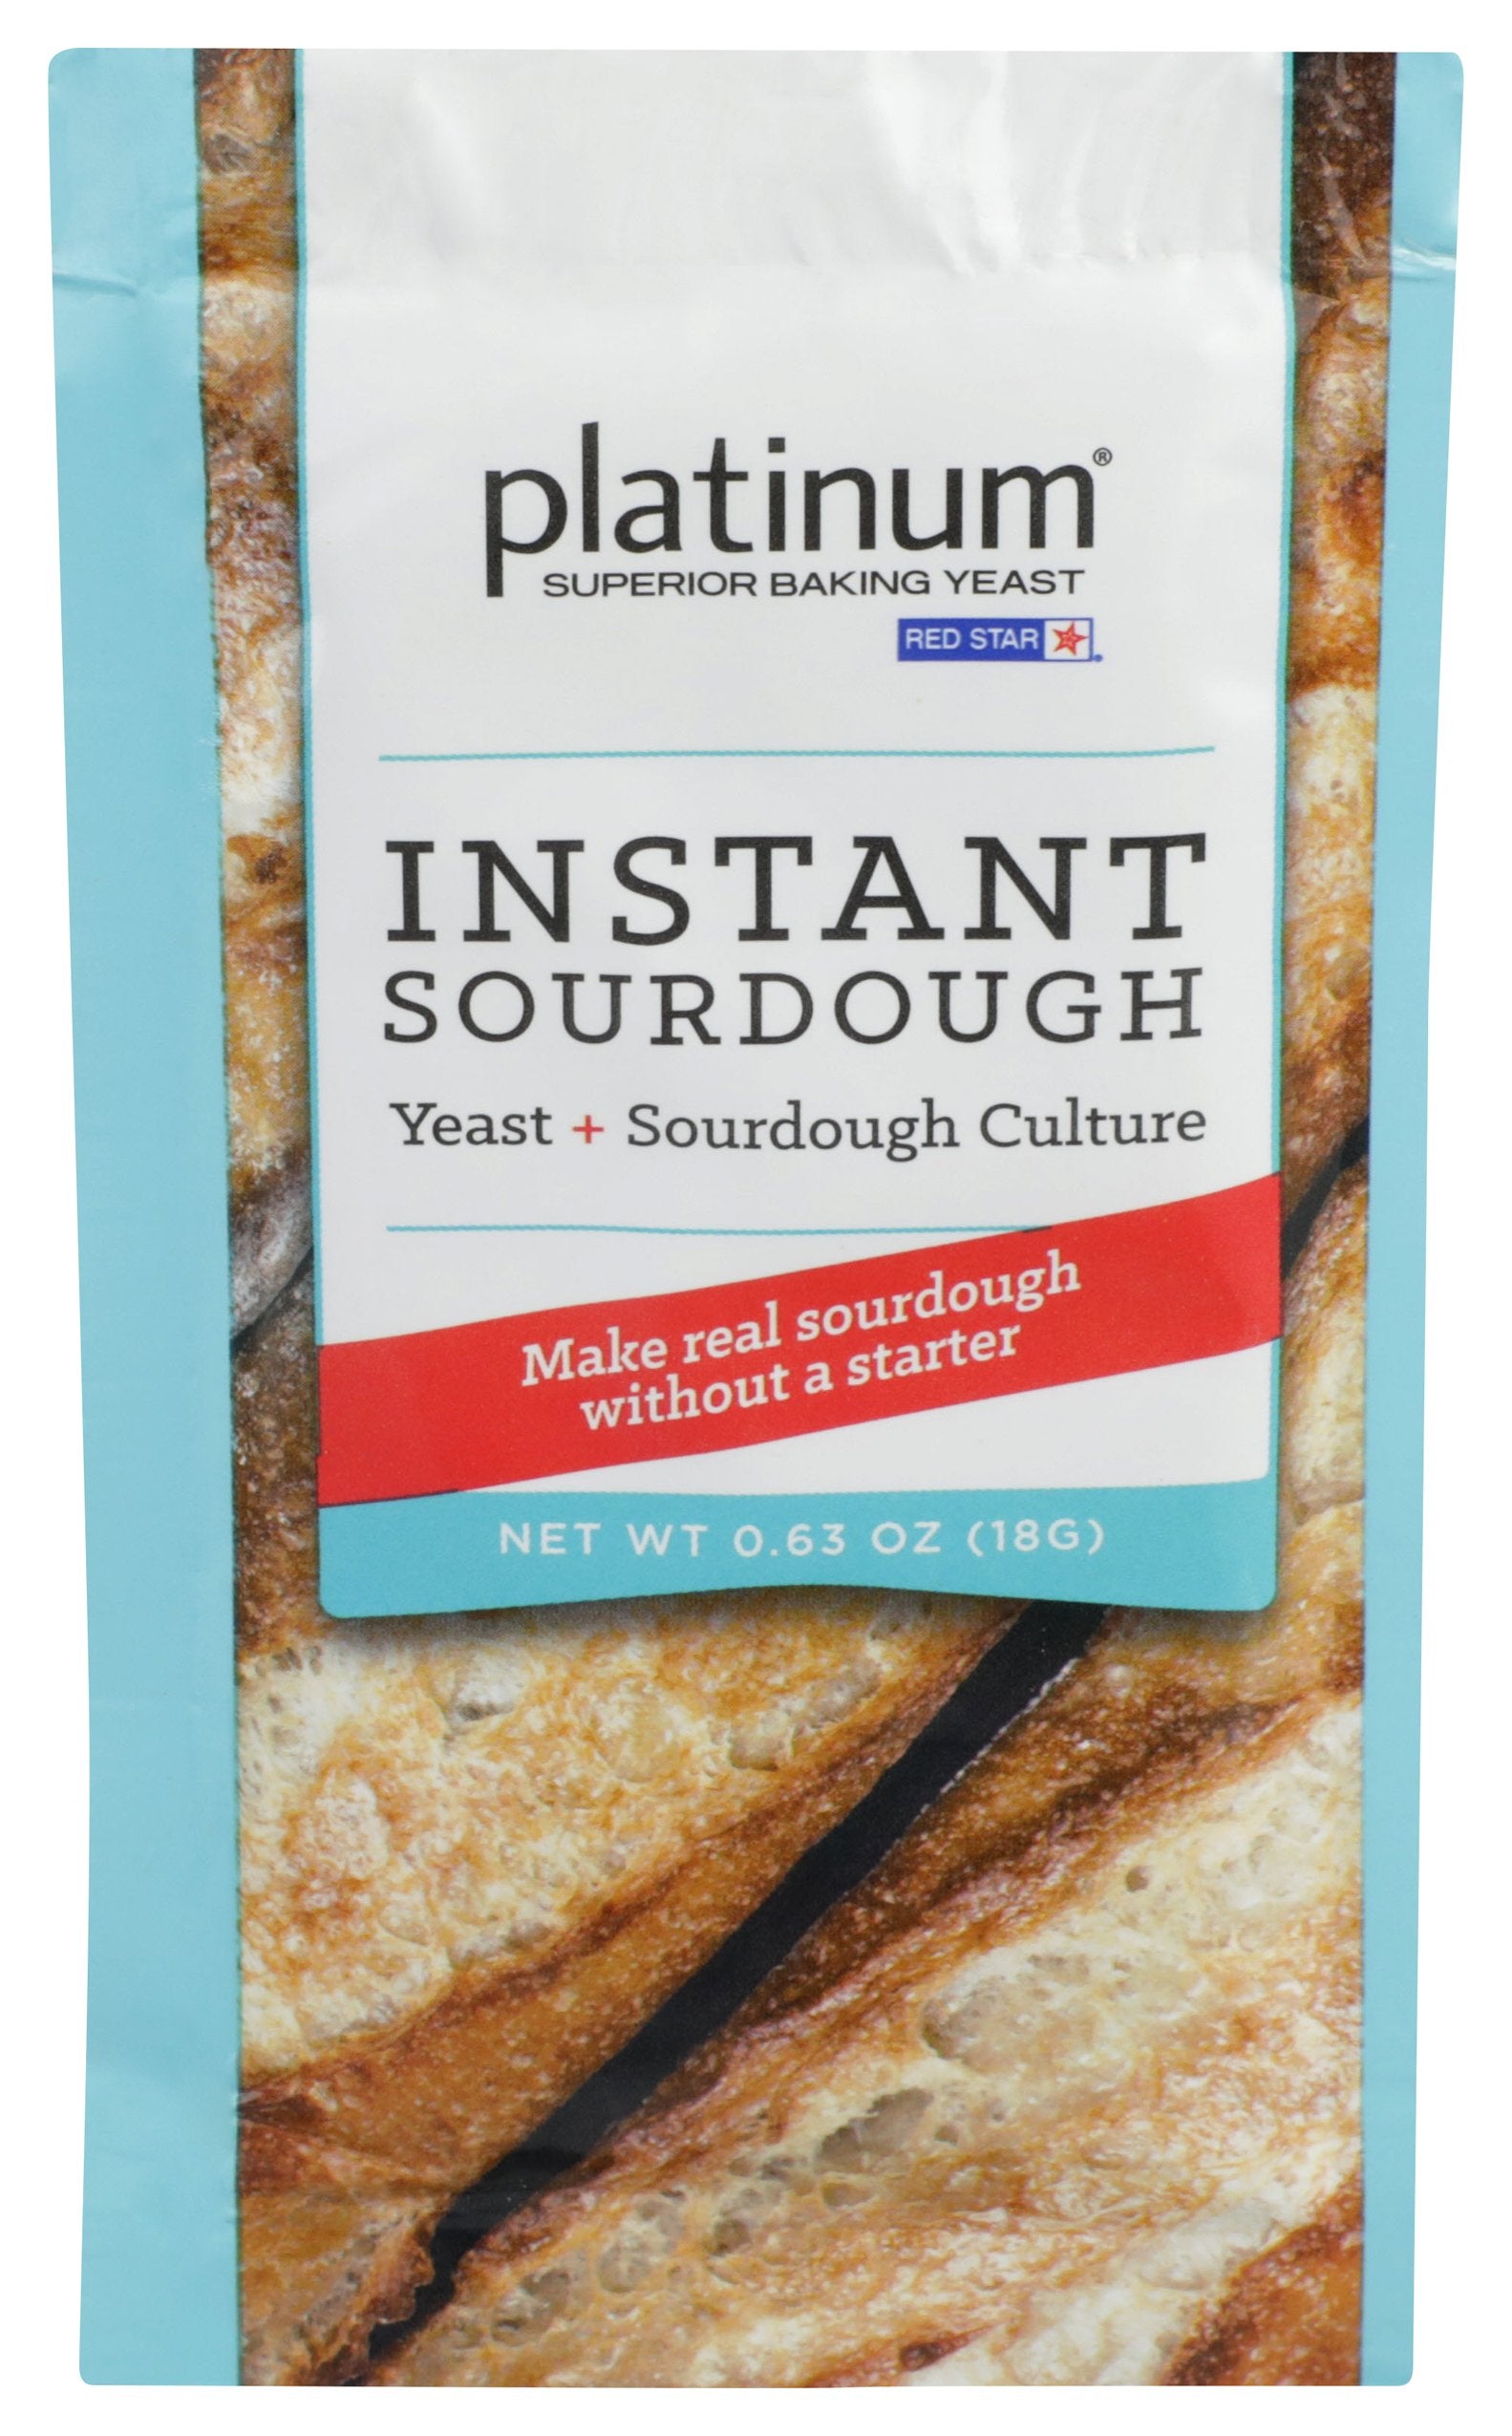 RED STAR YEAST INSTANT SOURDOUGH - Case of 20